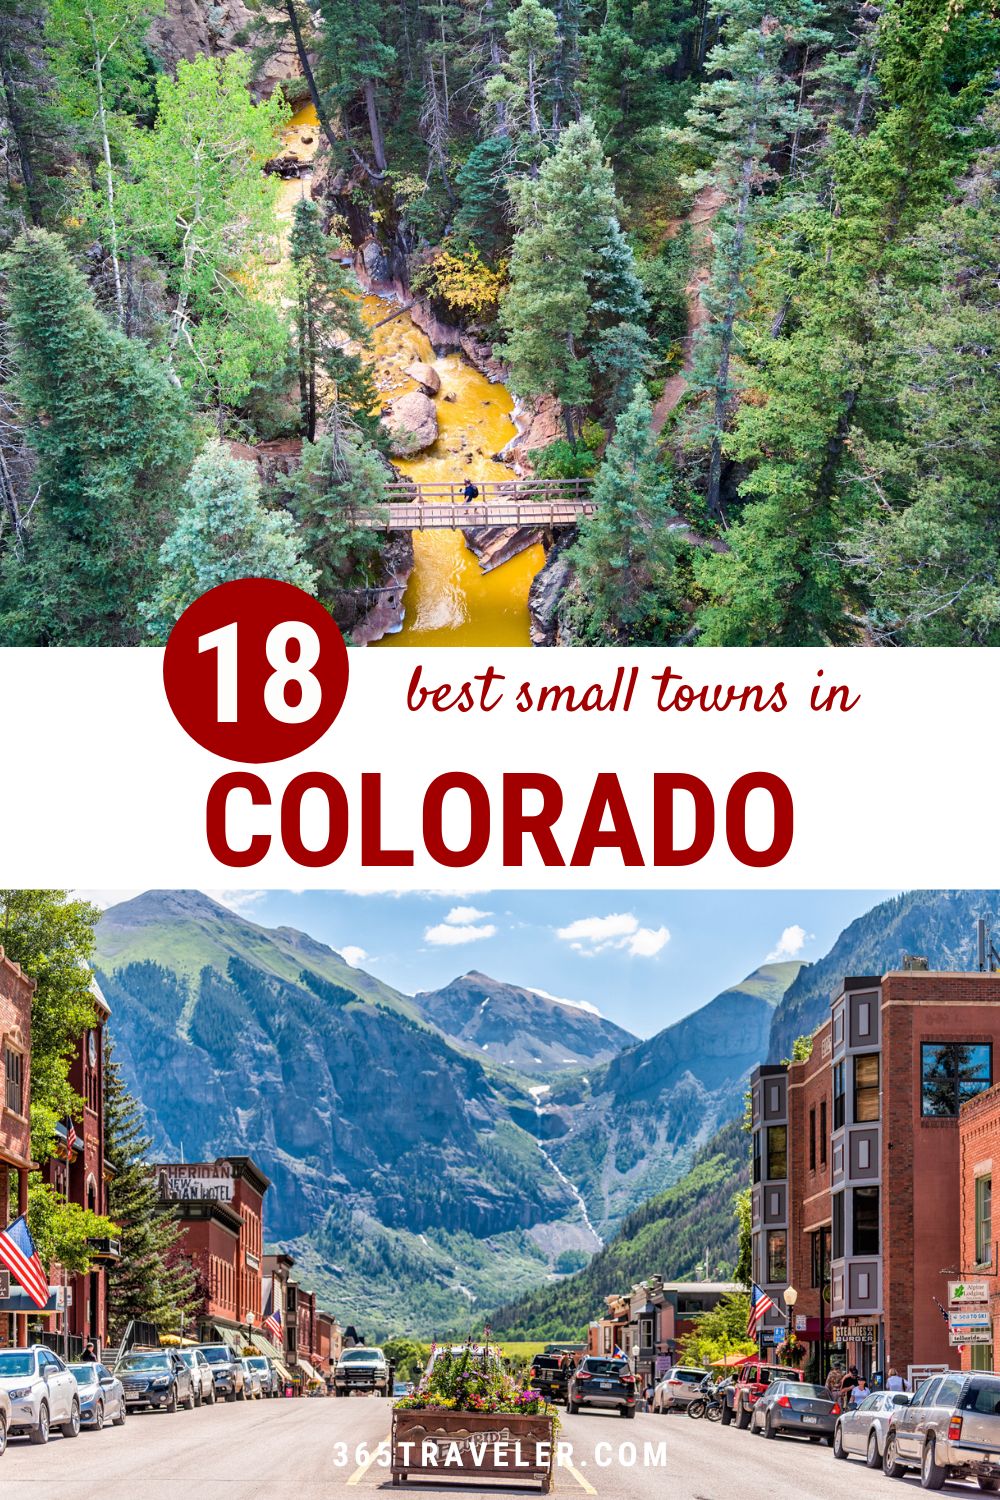 18 SMALL TOWNS IN COLORADO FULL OF BIG ADVENTURES